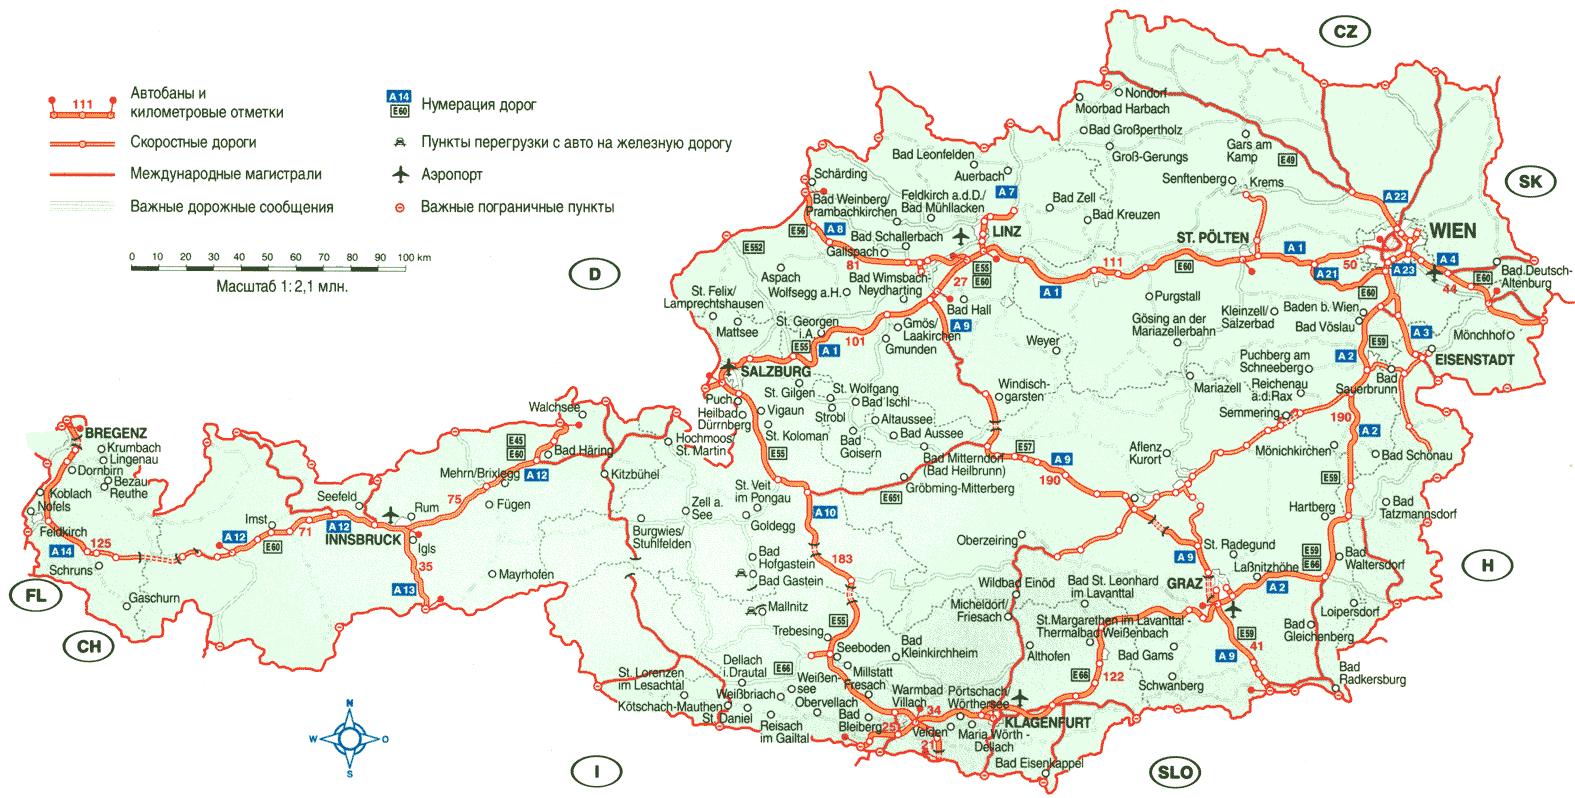 Detailed Highways Map Of Austria With Cities And Airports 